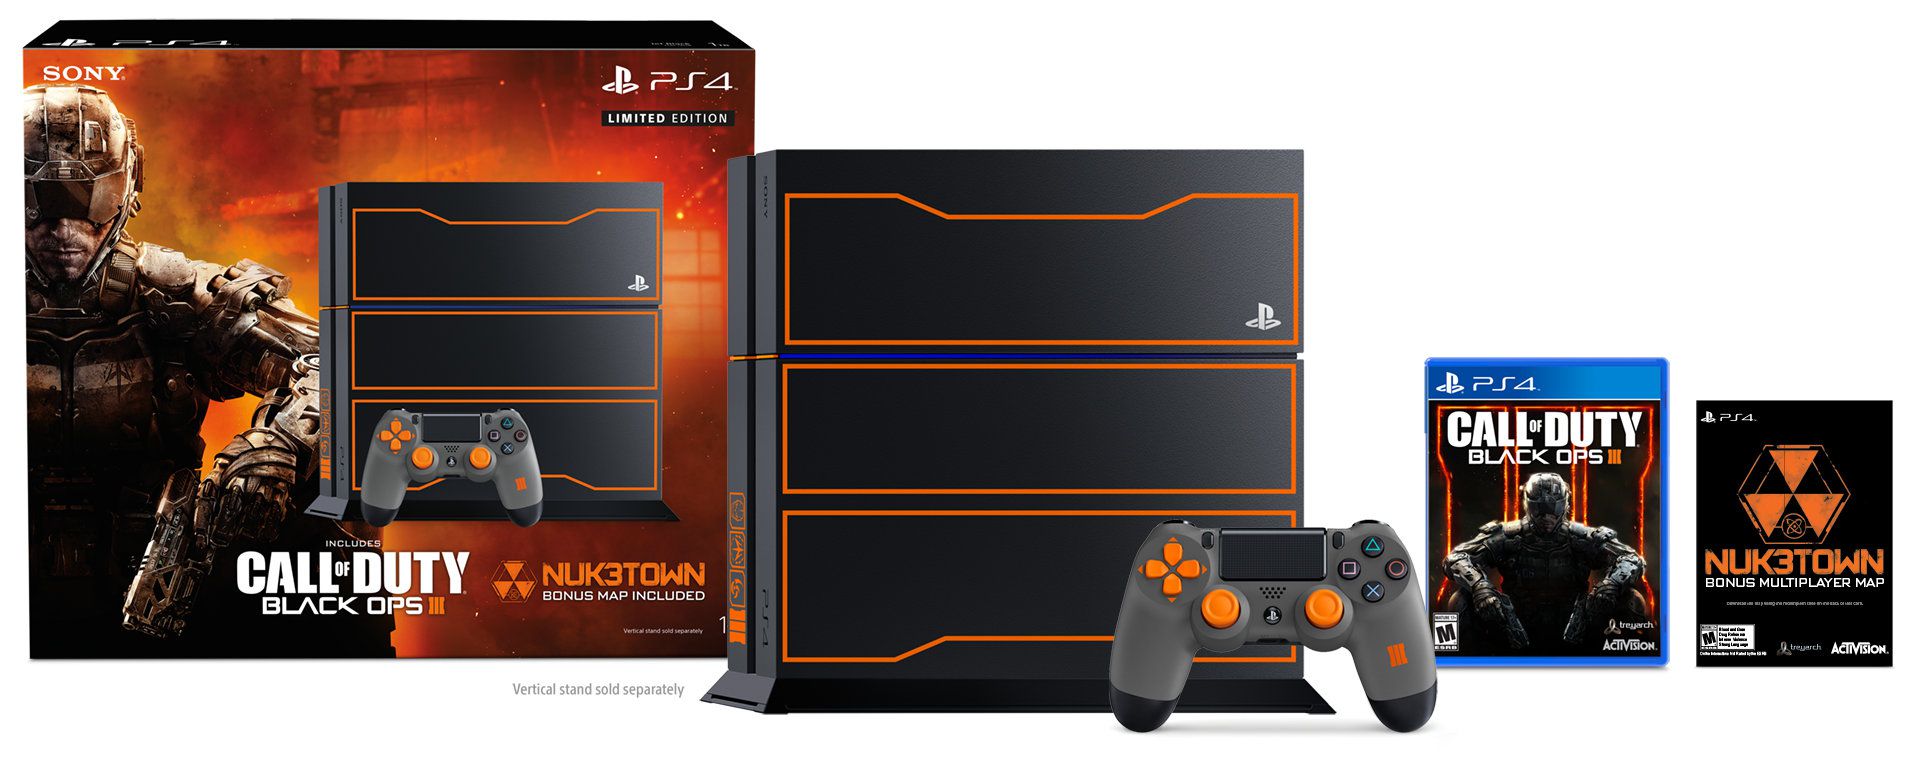 PS4 Black Ops 3 - 2